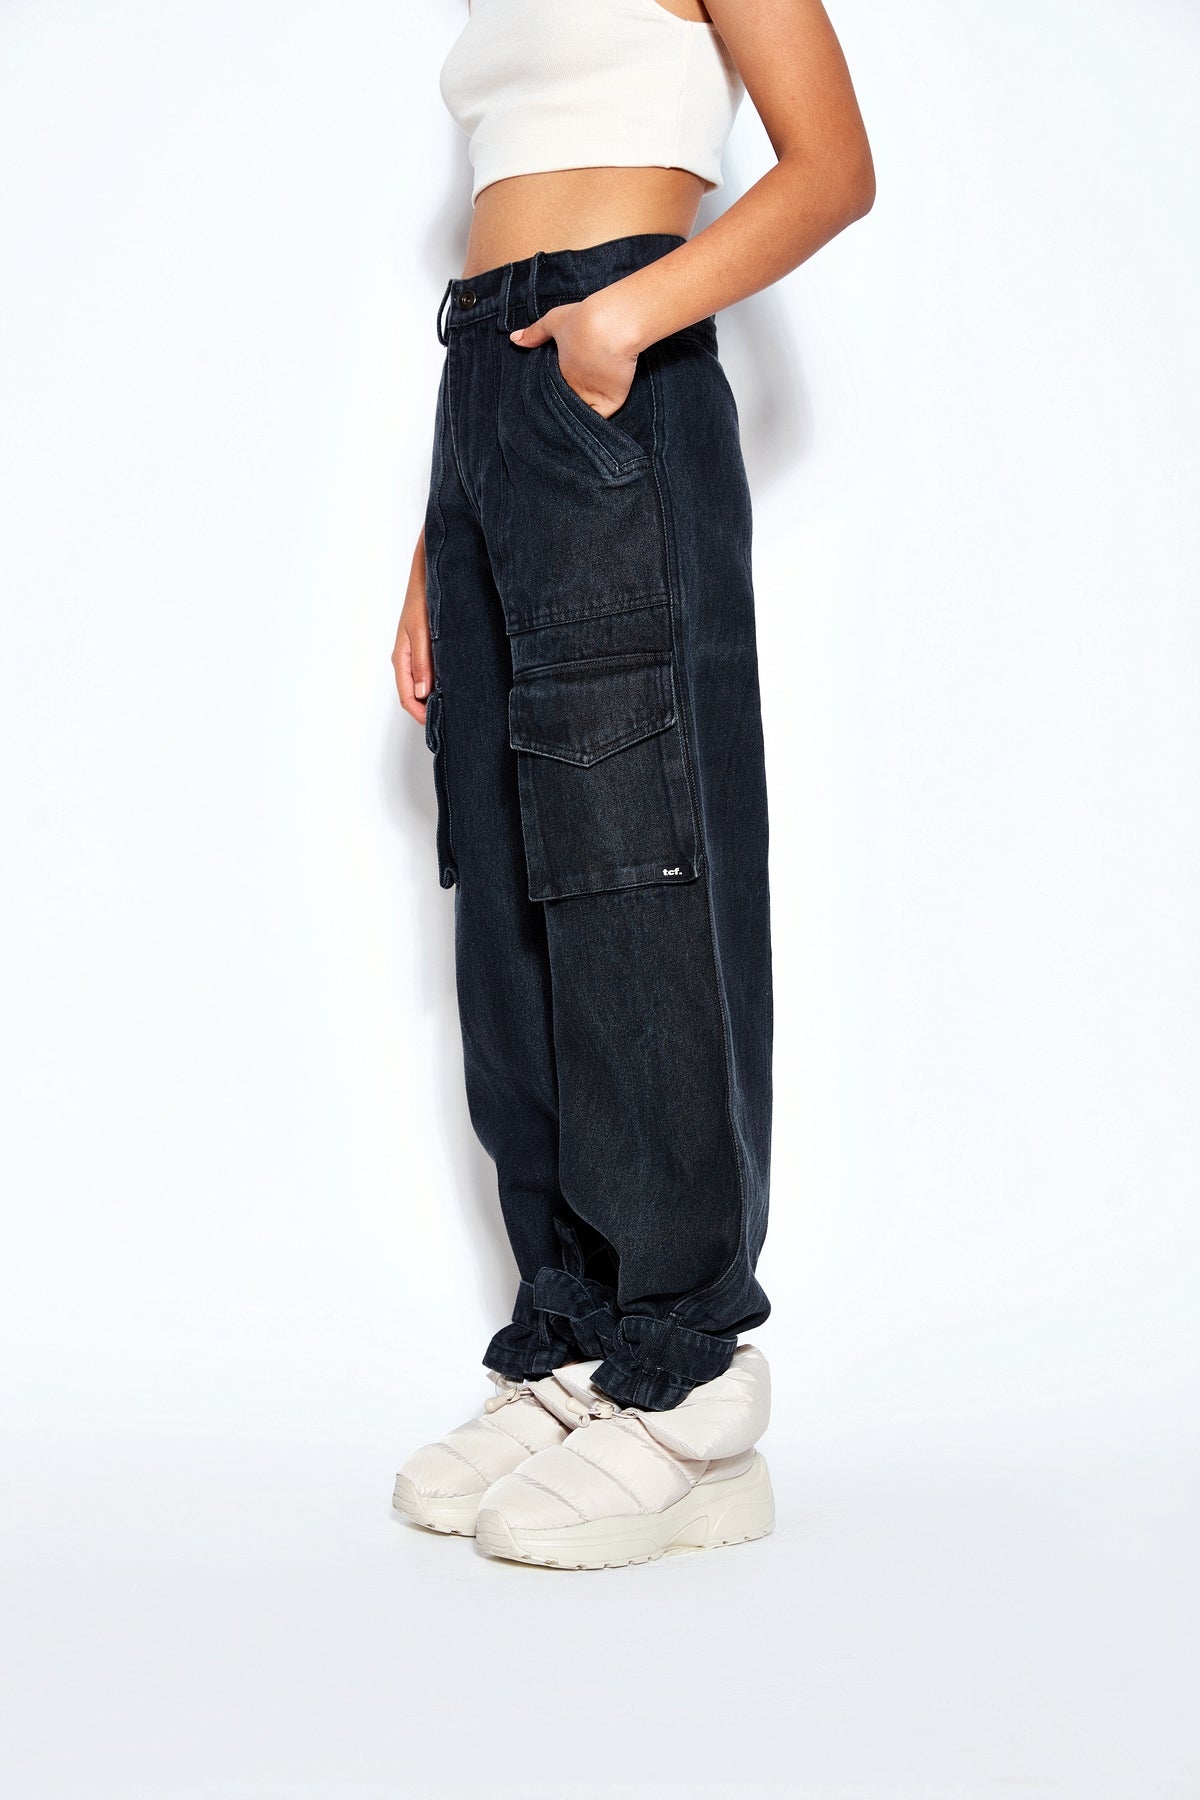 Route One Baggy Jeans | Route One